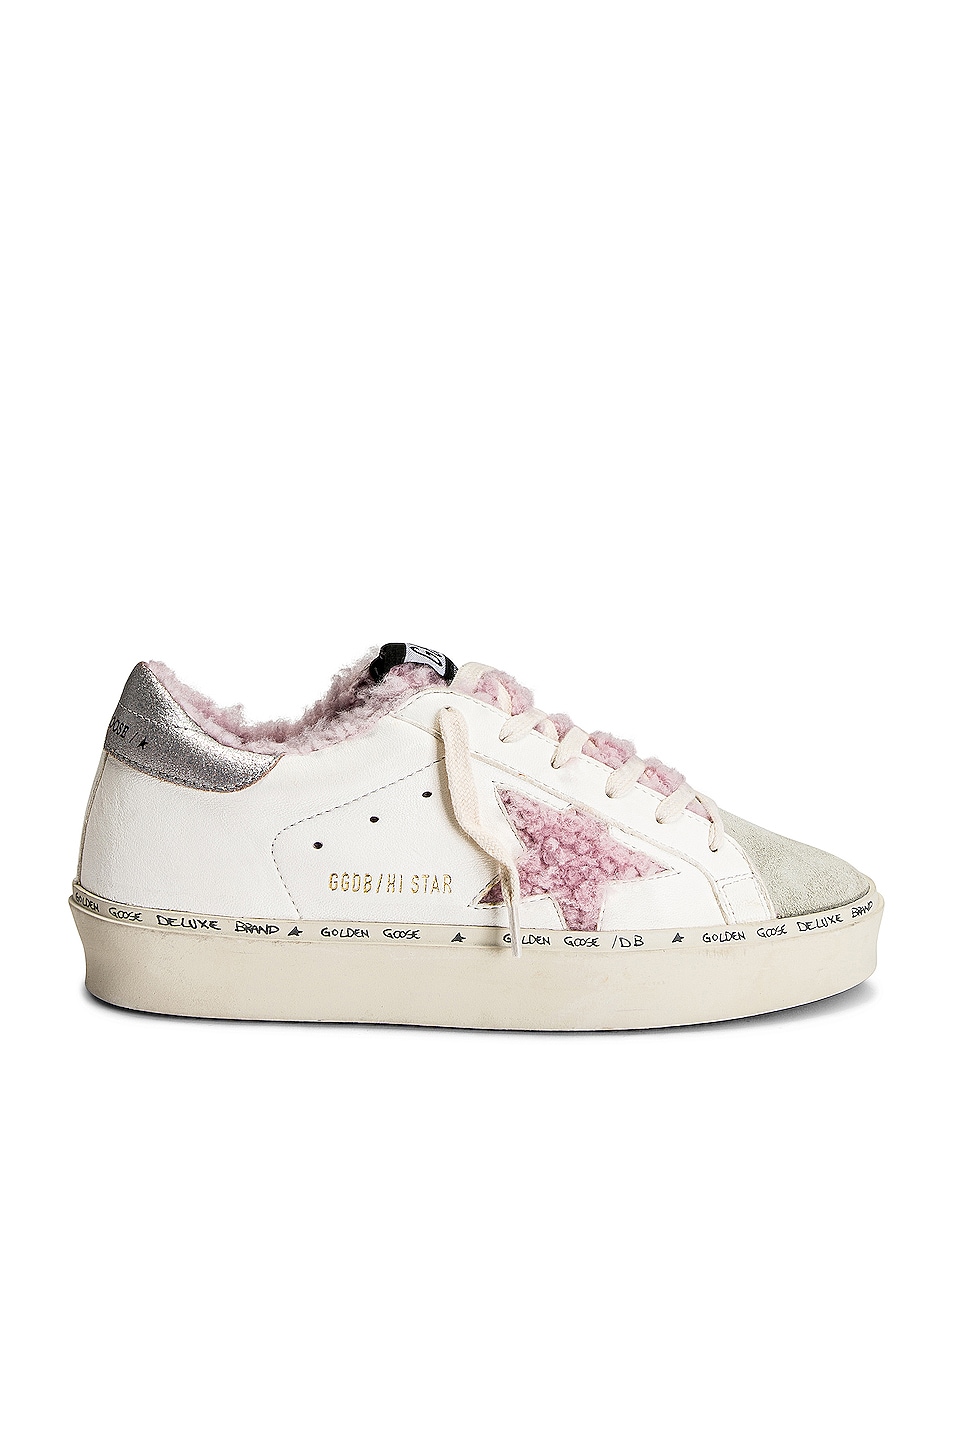 Image 1 of Golden Goose Hi Star Sneaker in White, Ice, Antique Pink, & Nude